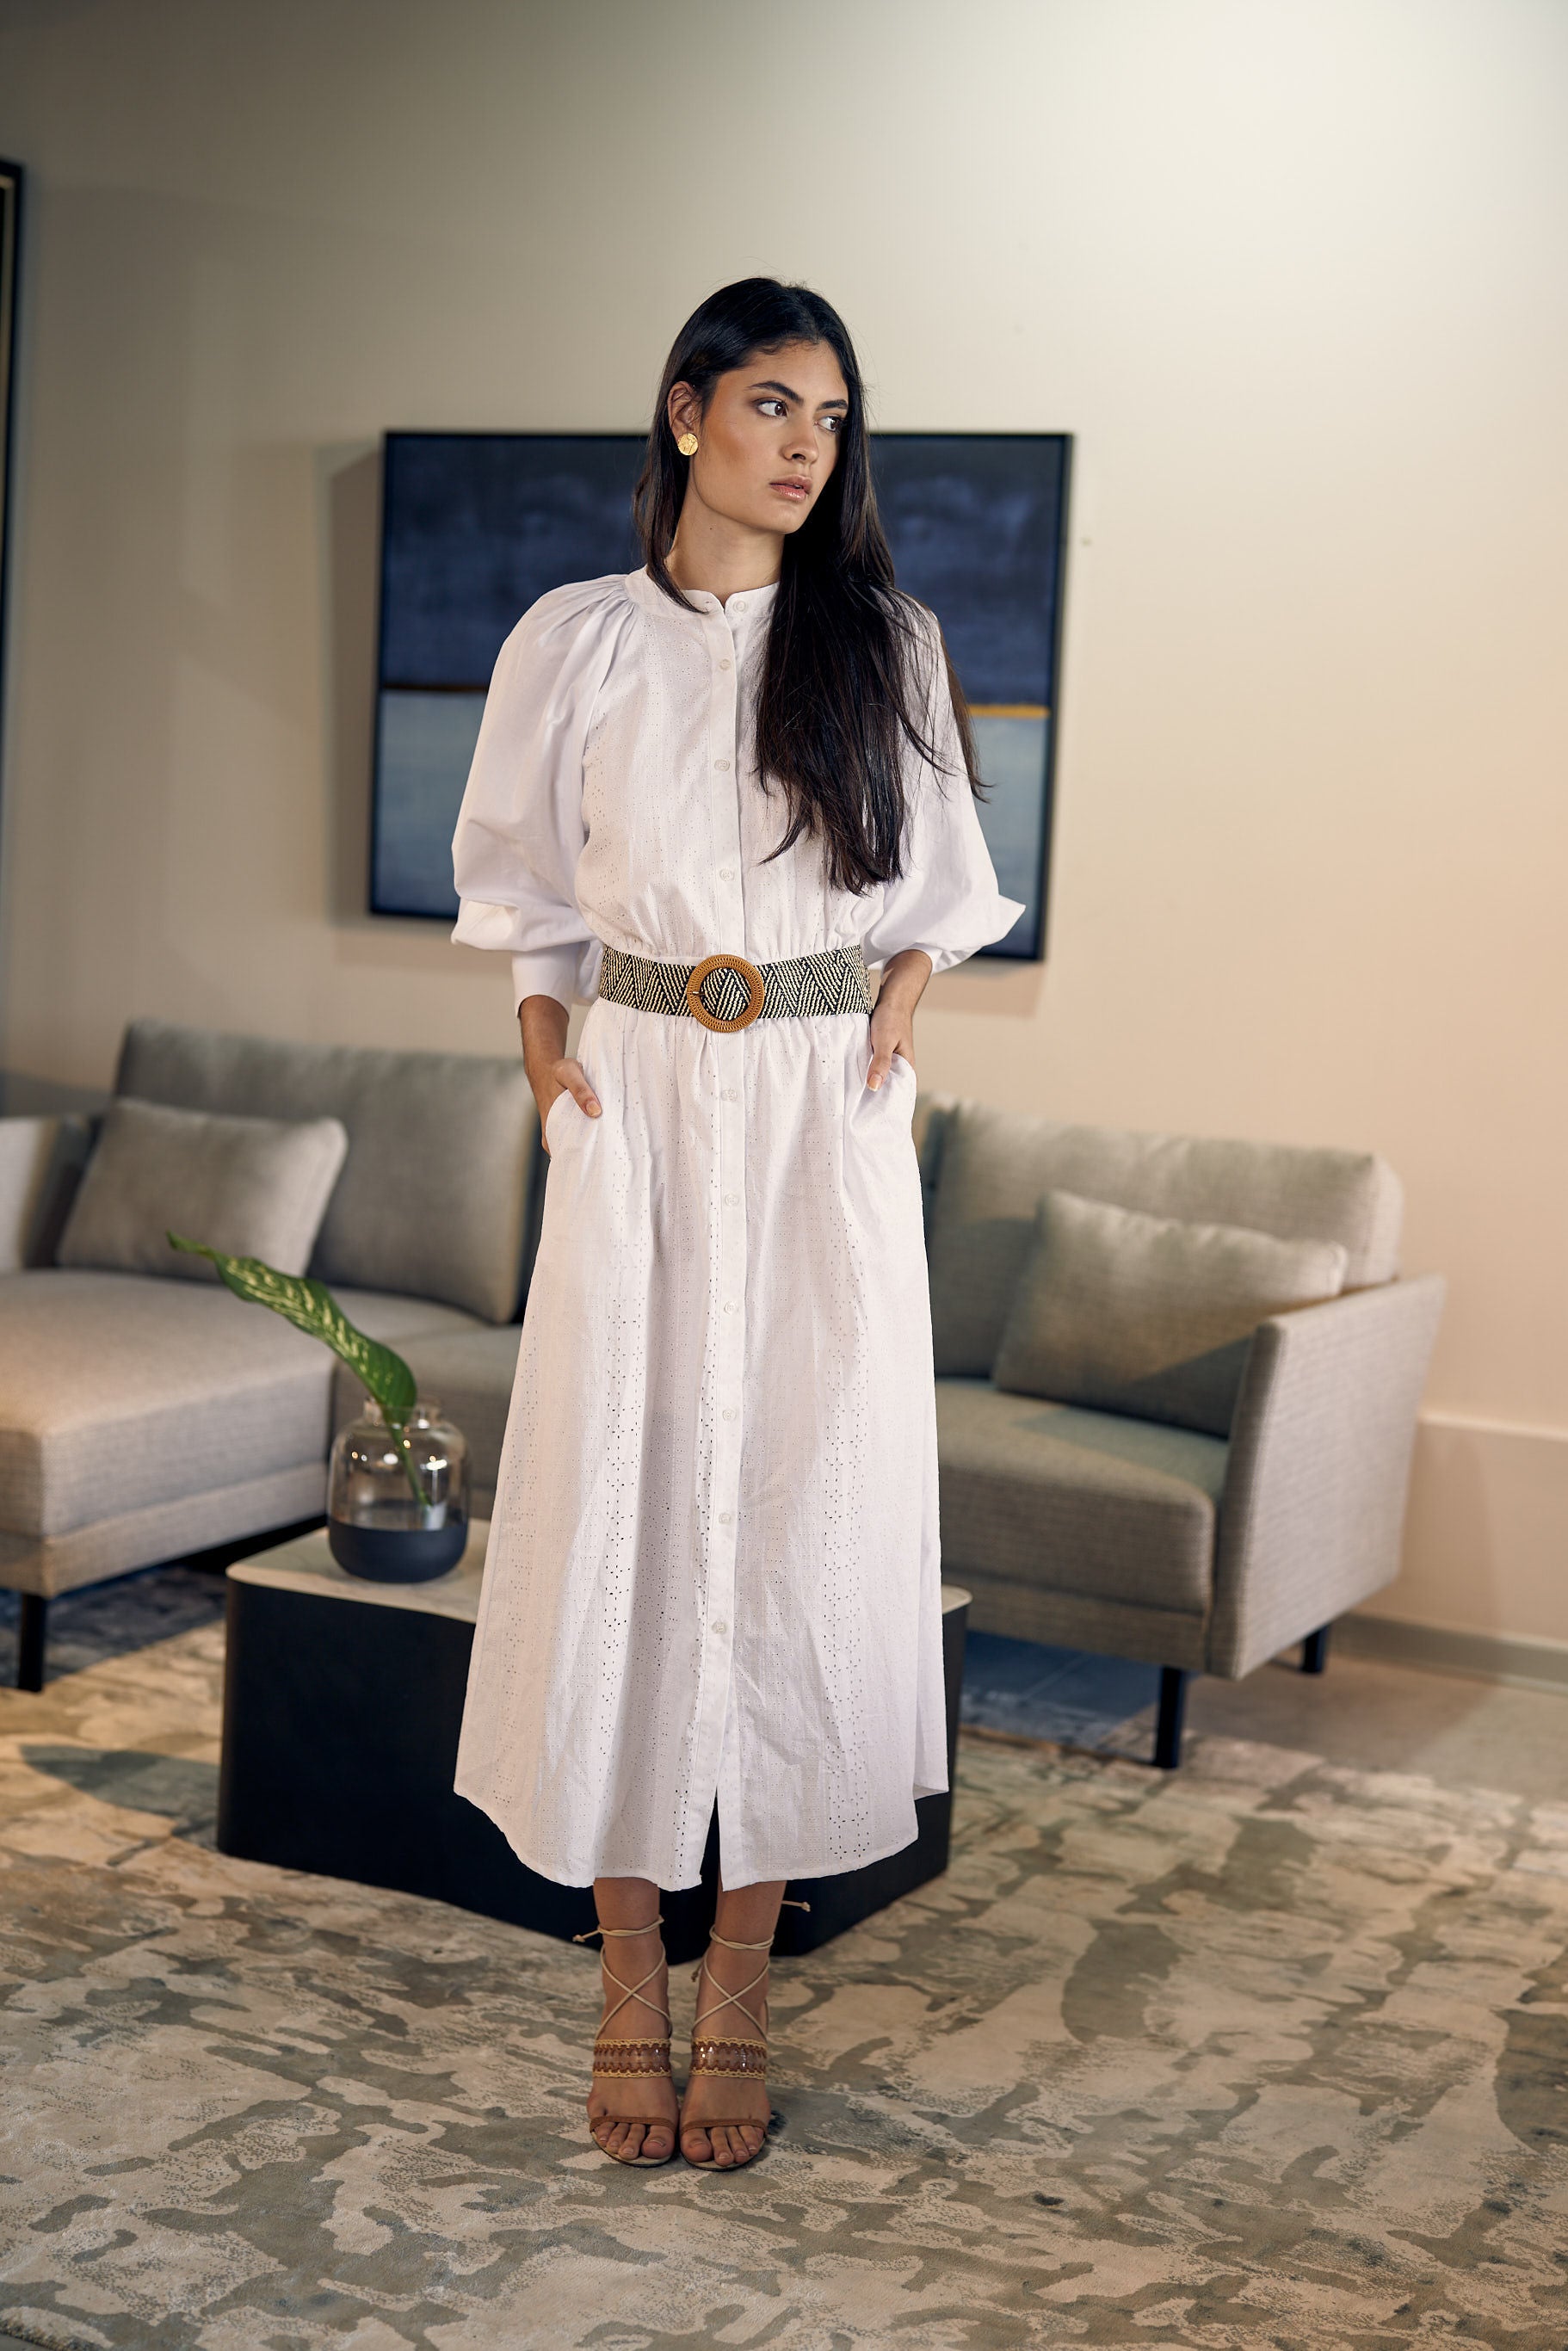 Sky White Sleeves Button Down Dress